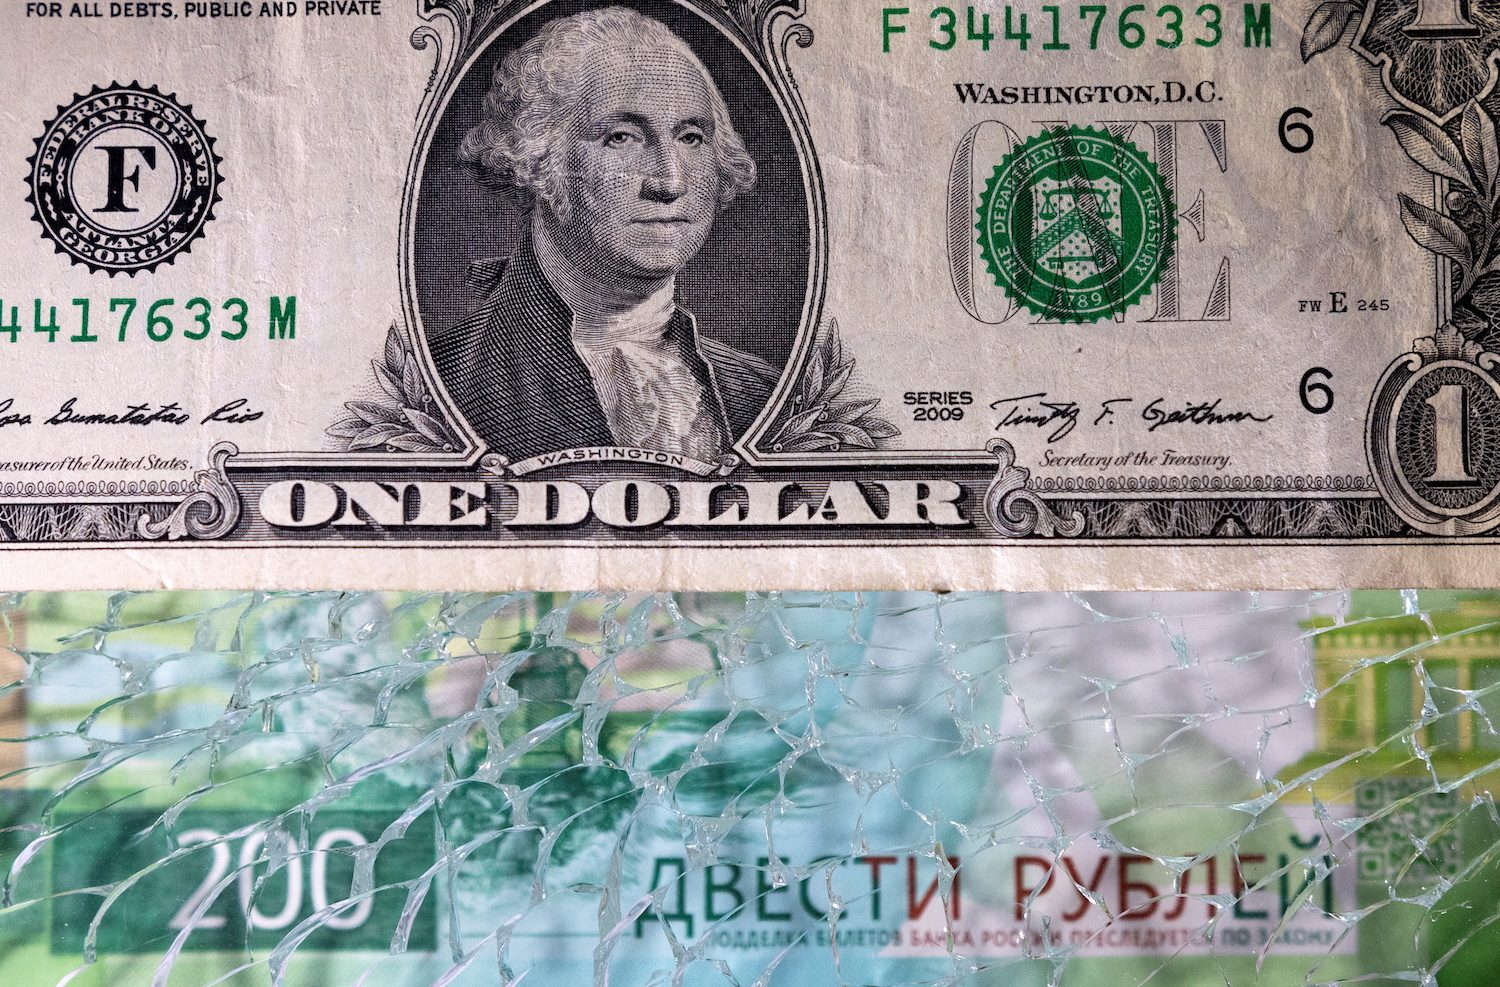 Russia says it may have to service FX debt in roubles due to sanctions